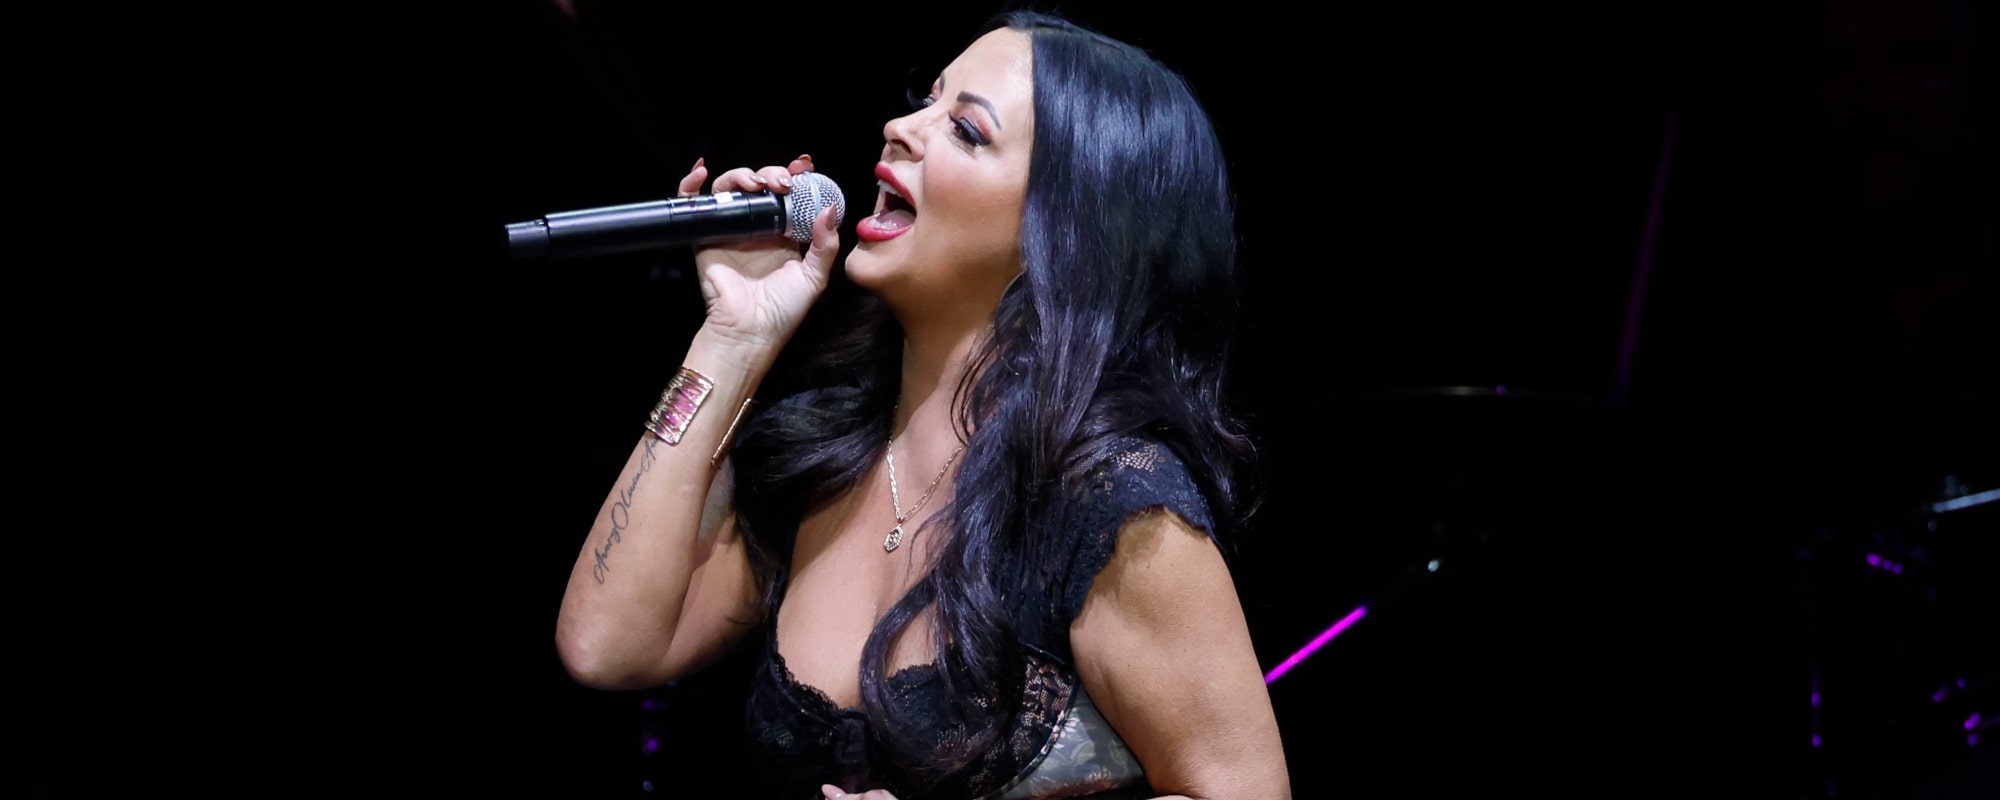 Sara Evans Drops Out of ACM Awards Last Minute, Reschedules Concerts